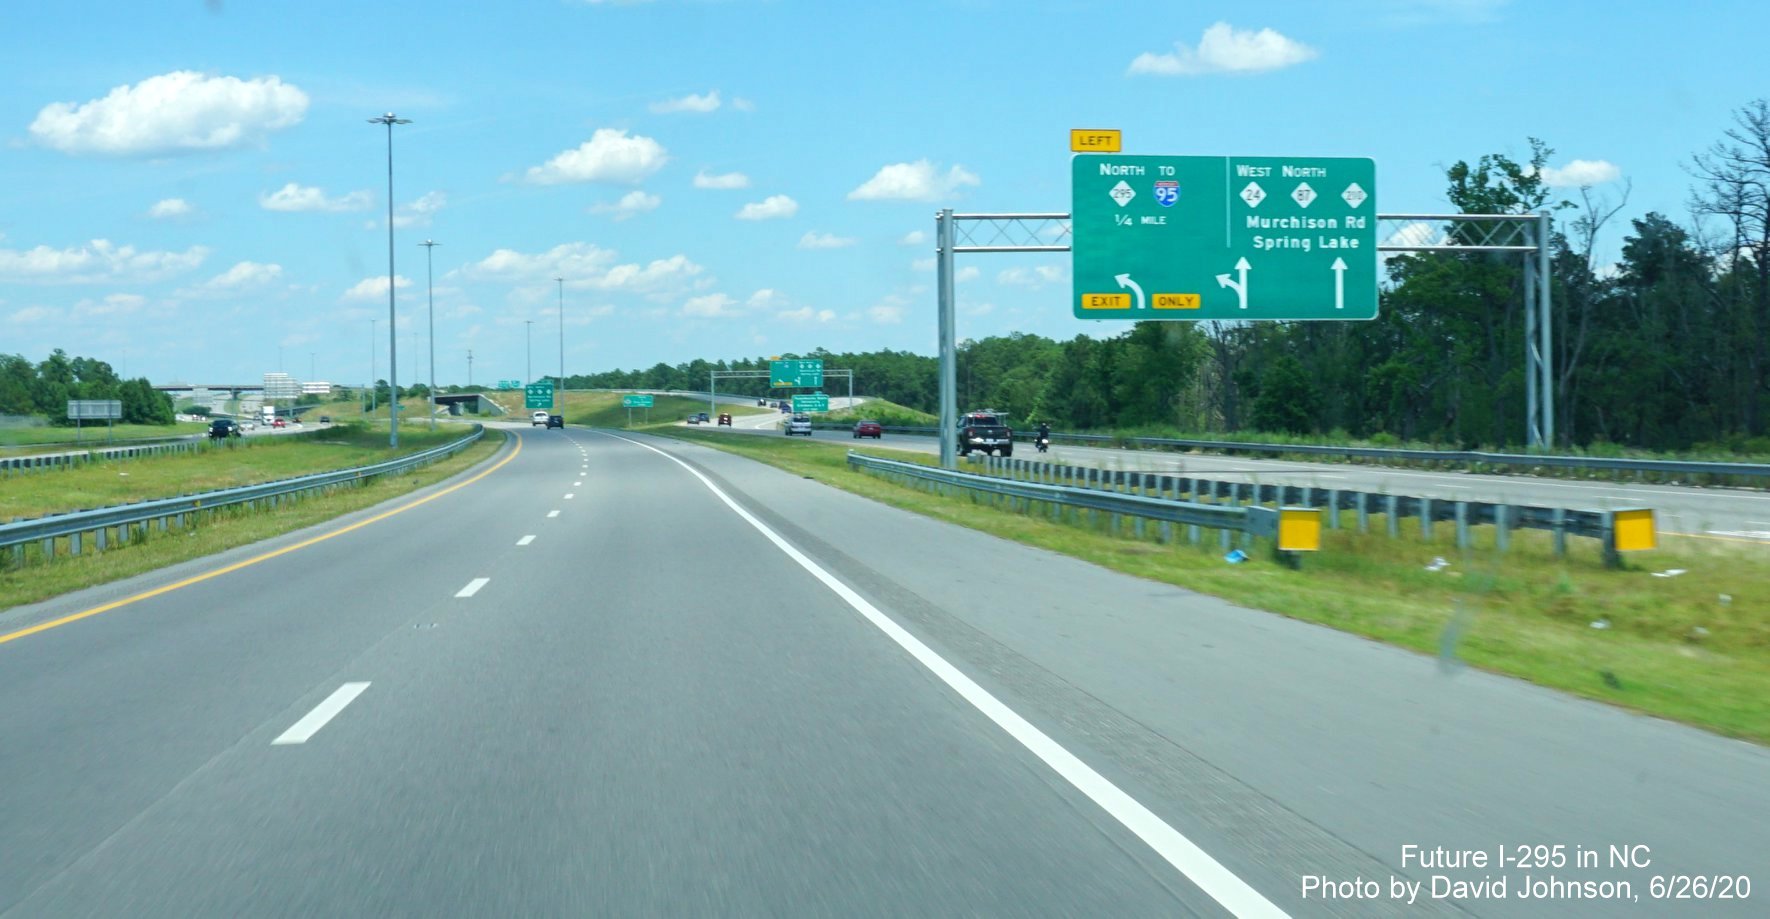 Image of overhead APL signage along I-295 North C/D lanes with NC 295 North listed, by David Johnson June 2020